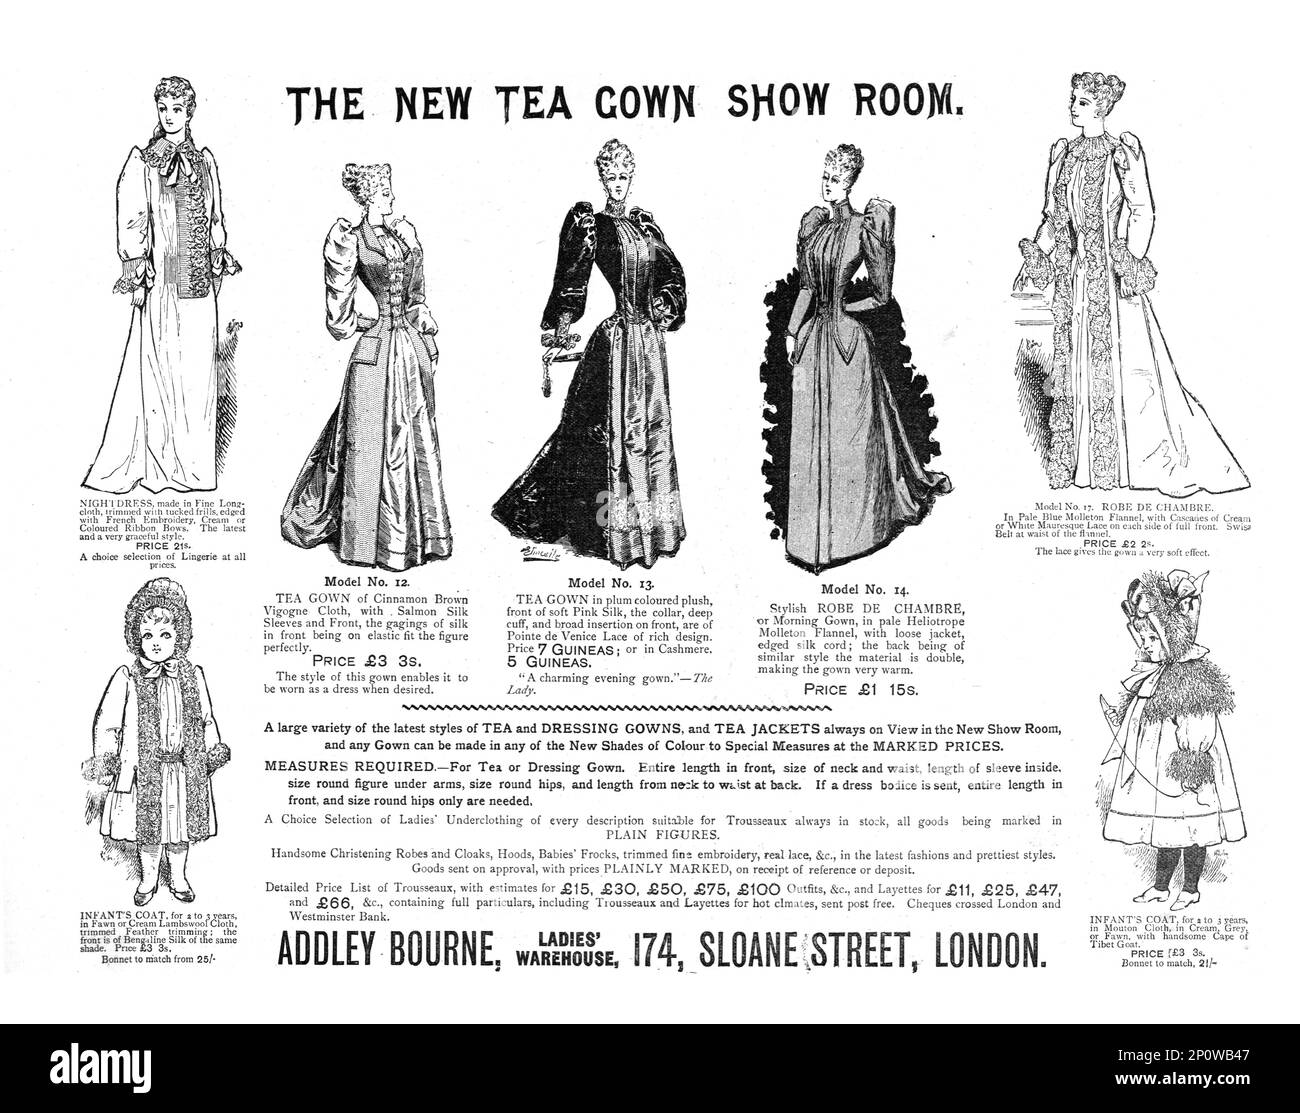 „Addley Bourne Ladies Warehouse; The New Tea Gown Show Room“, 1891. Aus „The Graphic. An Illustrated Weekly Newspaper“, Band 44. Juli bis Dezember 1891. Stockfoto